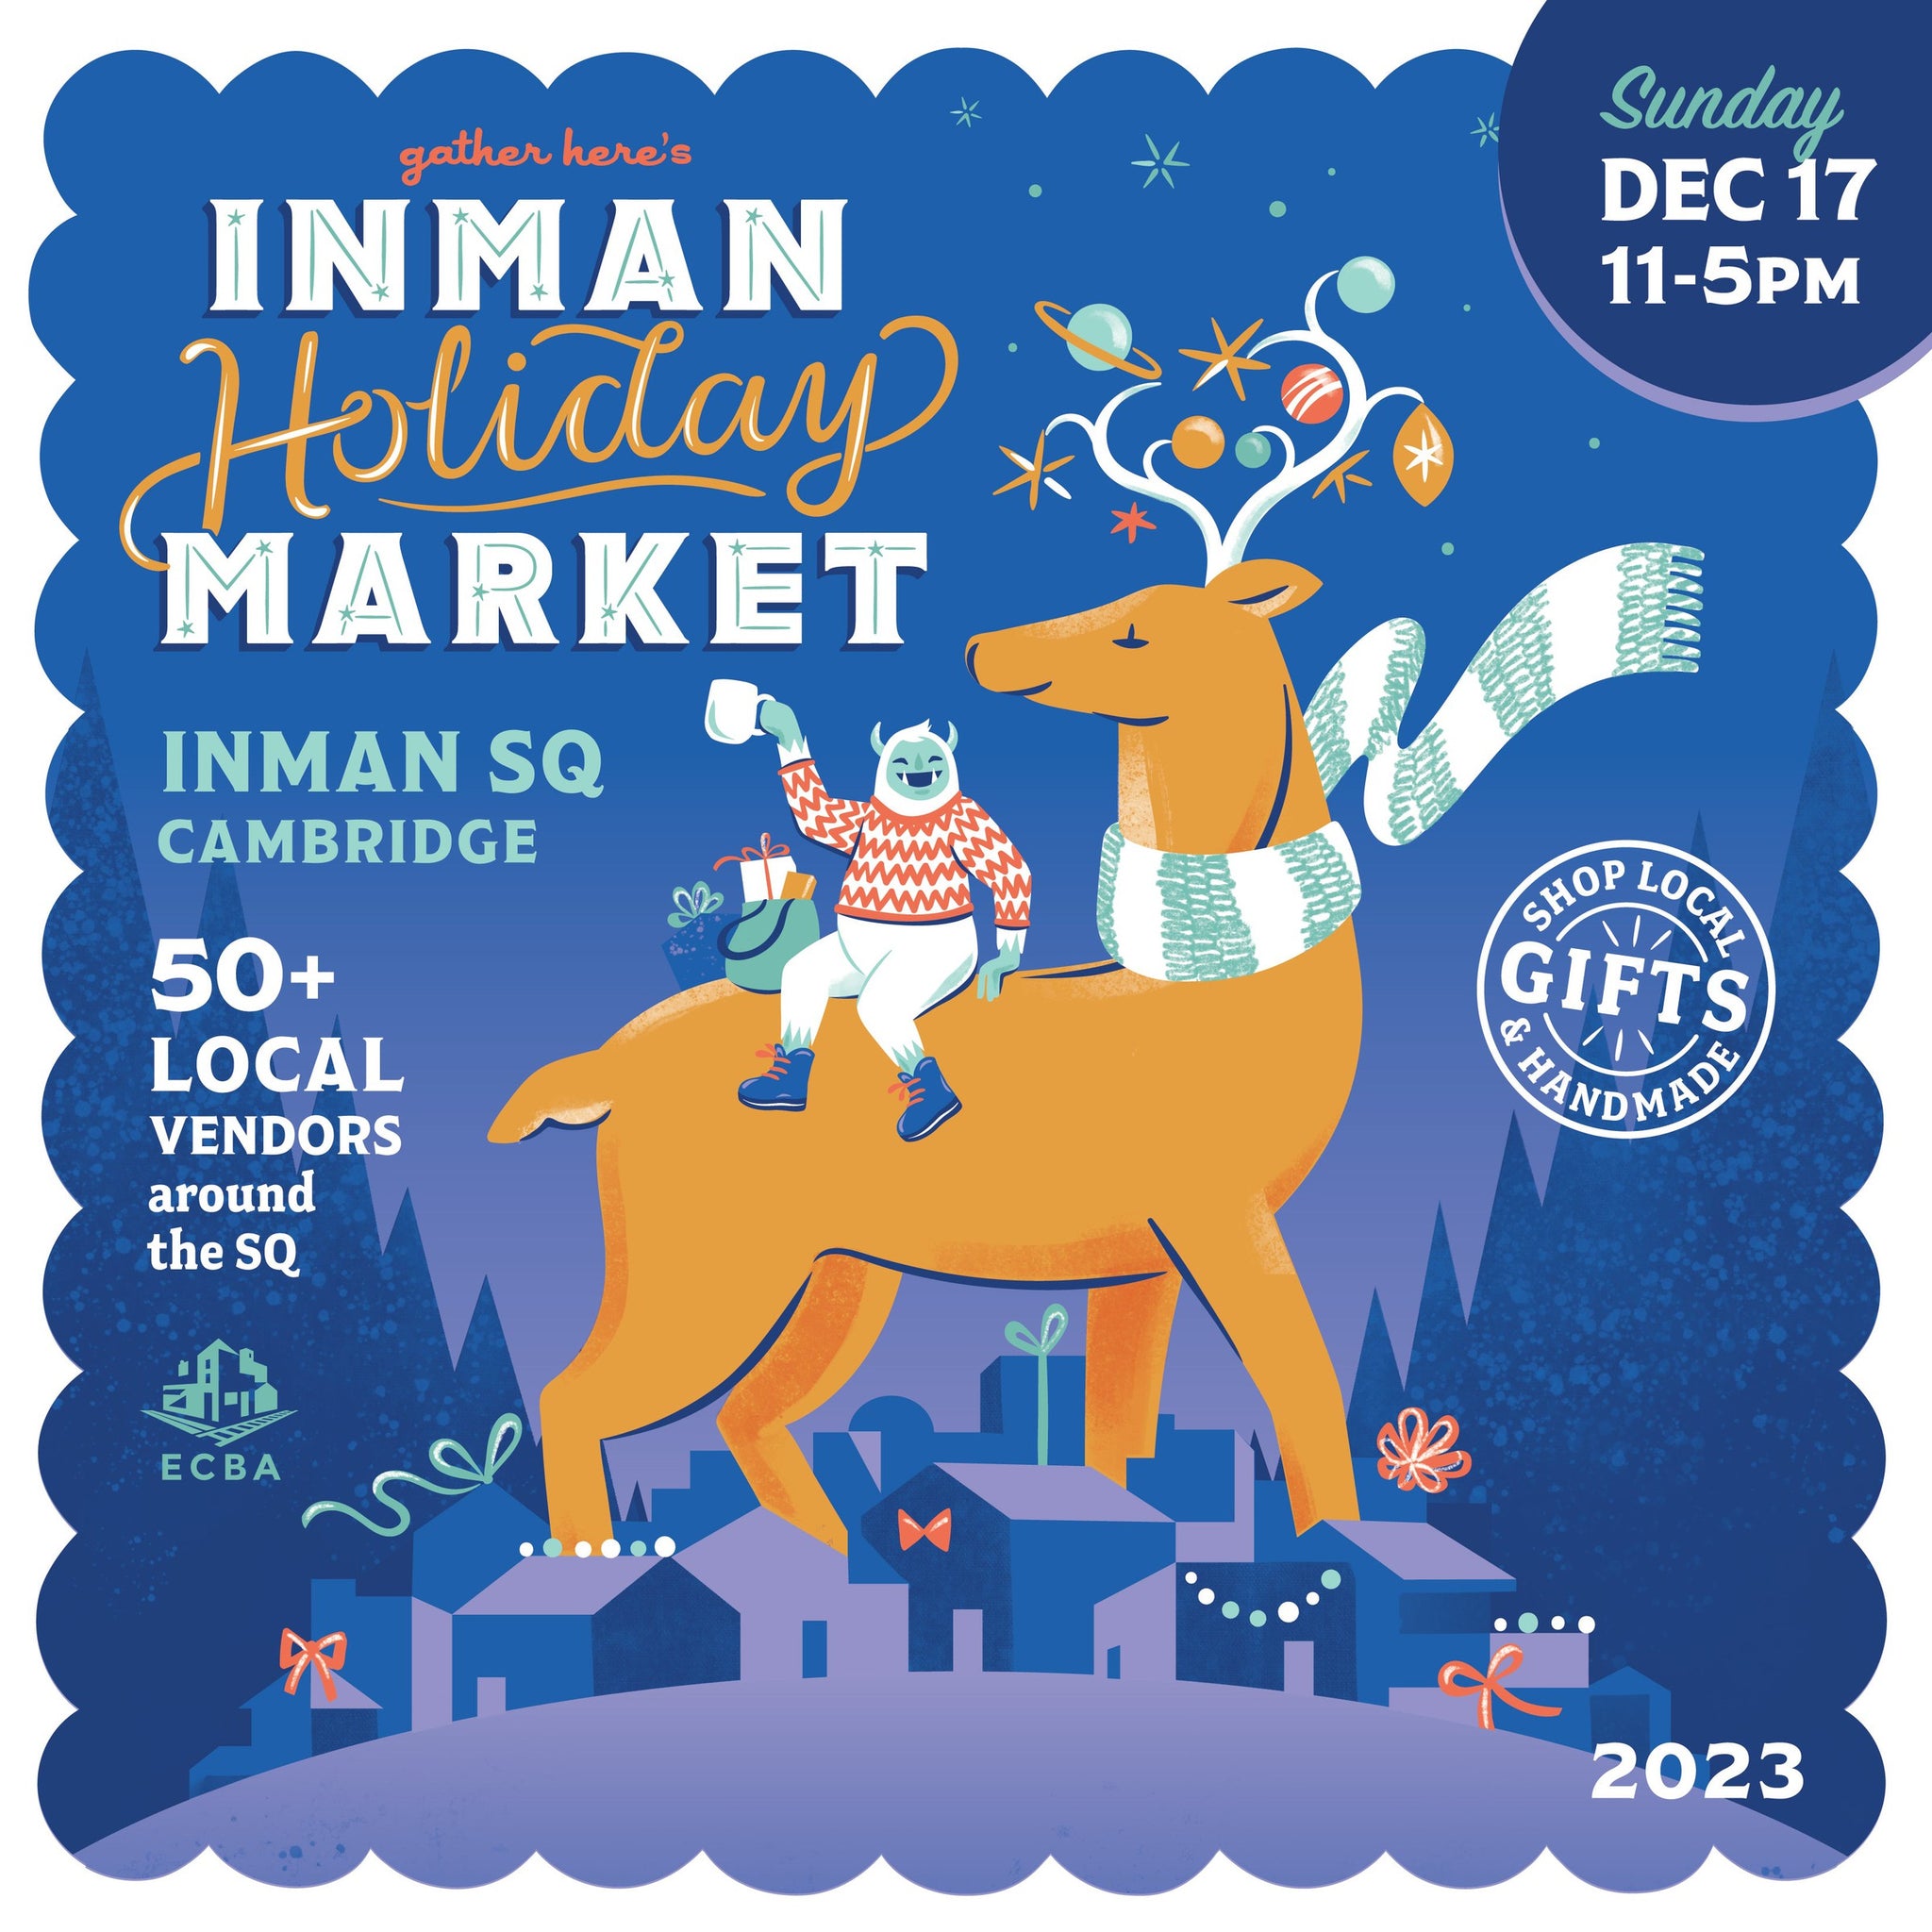 2022 Inman Square Holiday Market gather here online